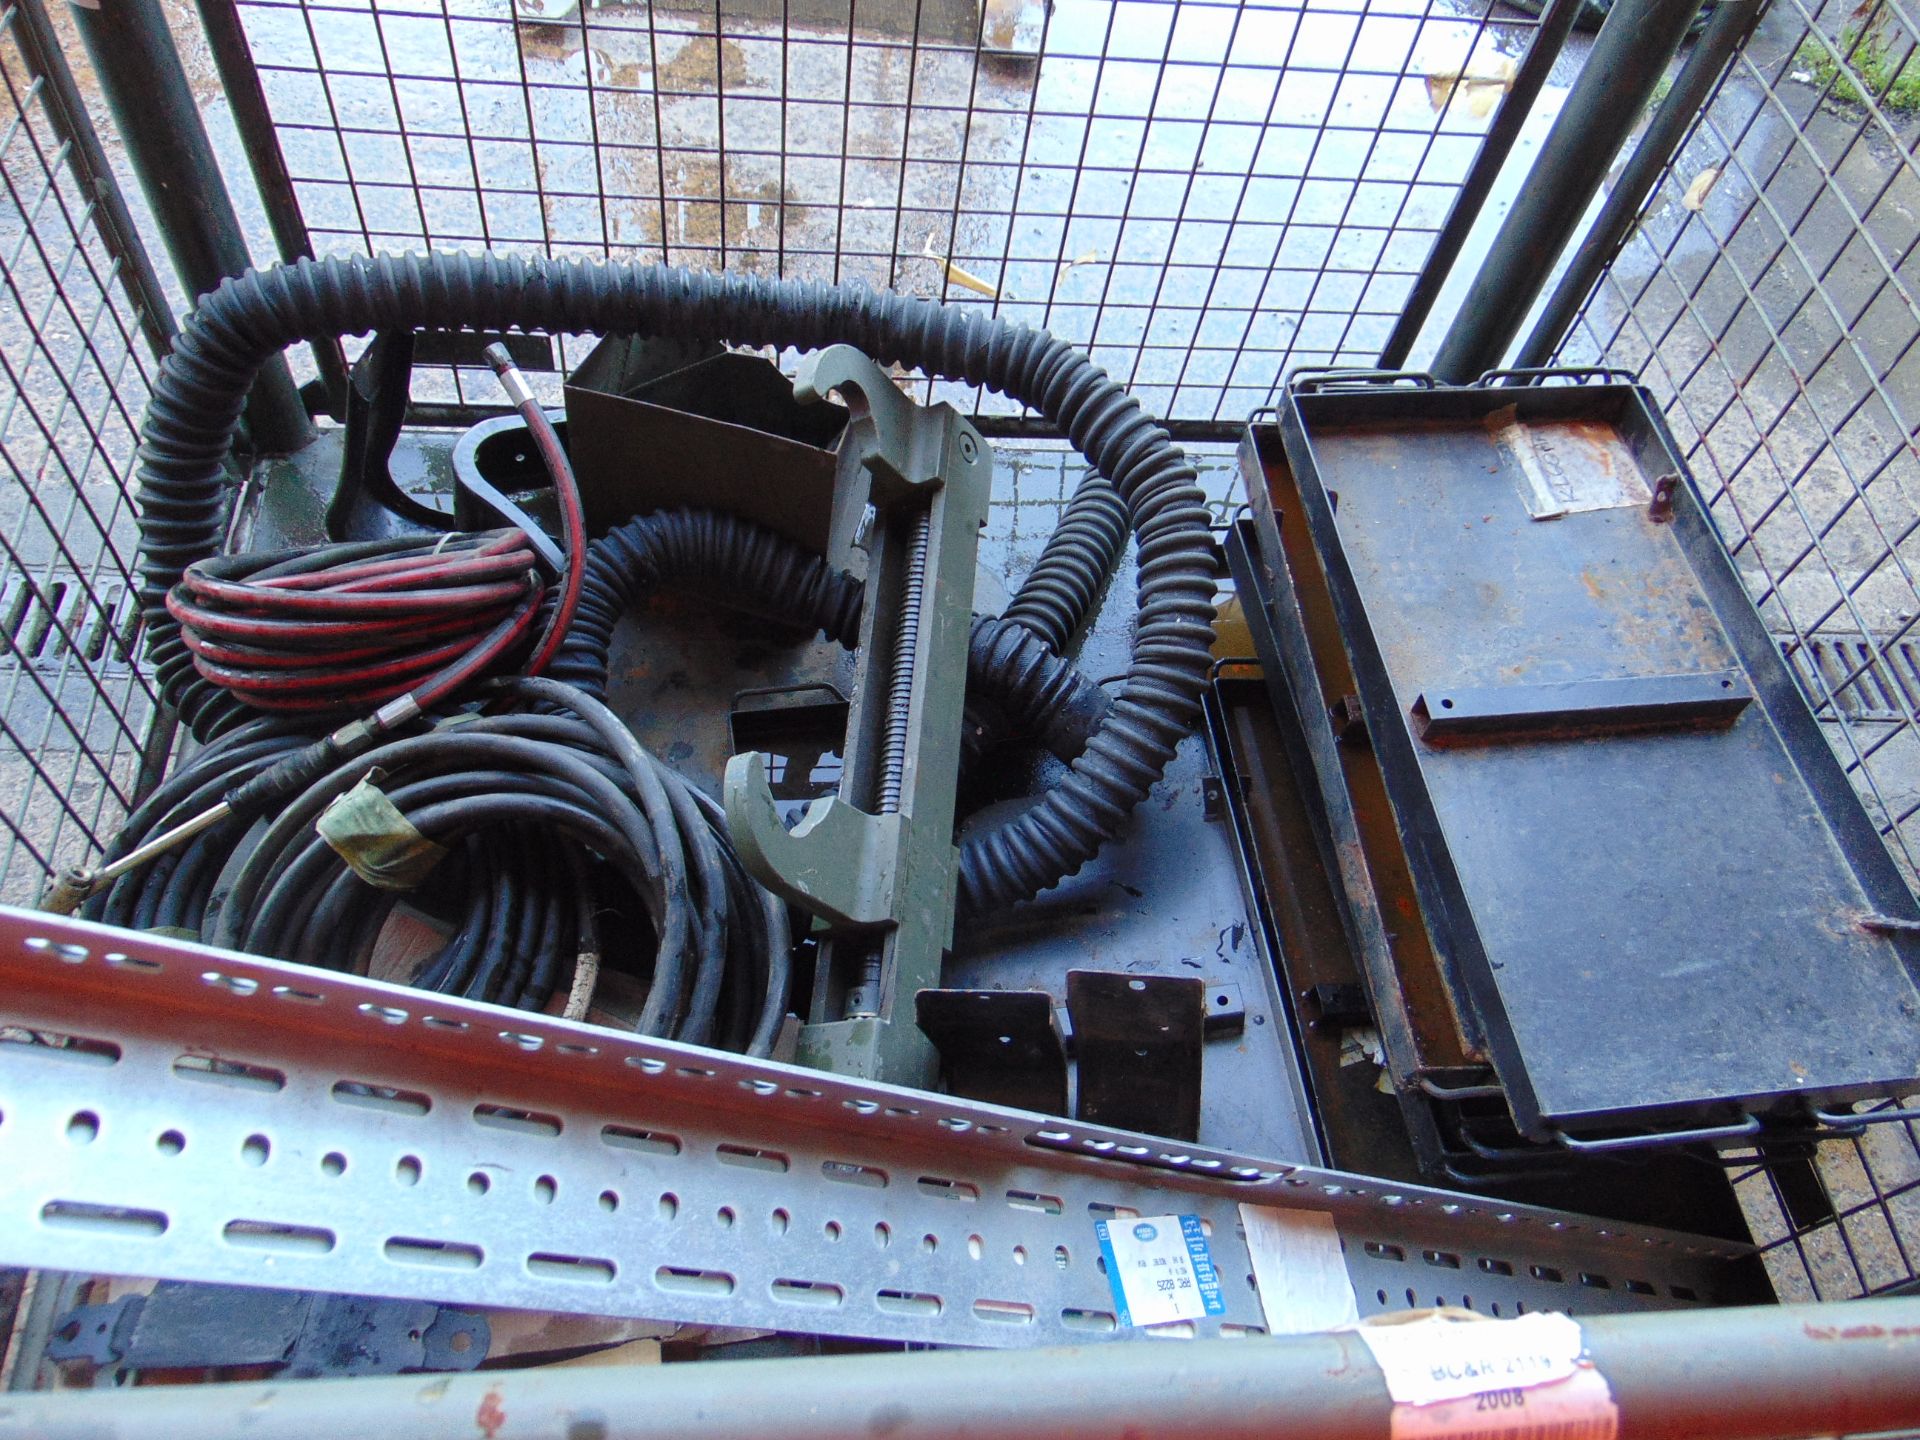 1 x Stillage of Track Clamps, Air Lines, Land Rover Battery Trays, Weapon Tray etc - Image 2 of 8